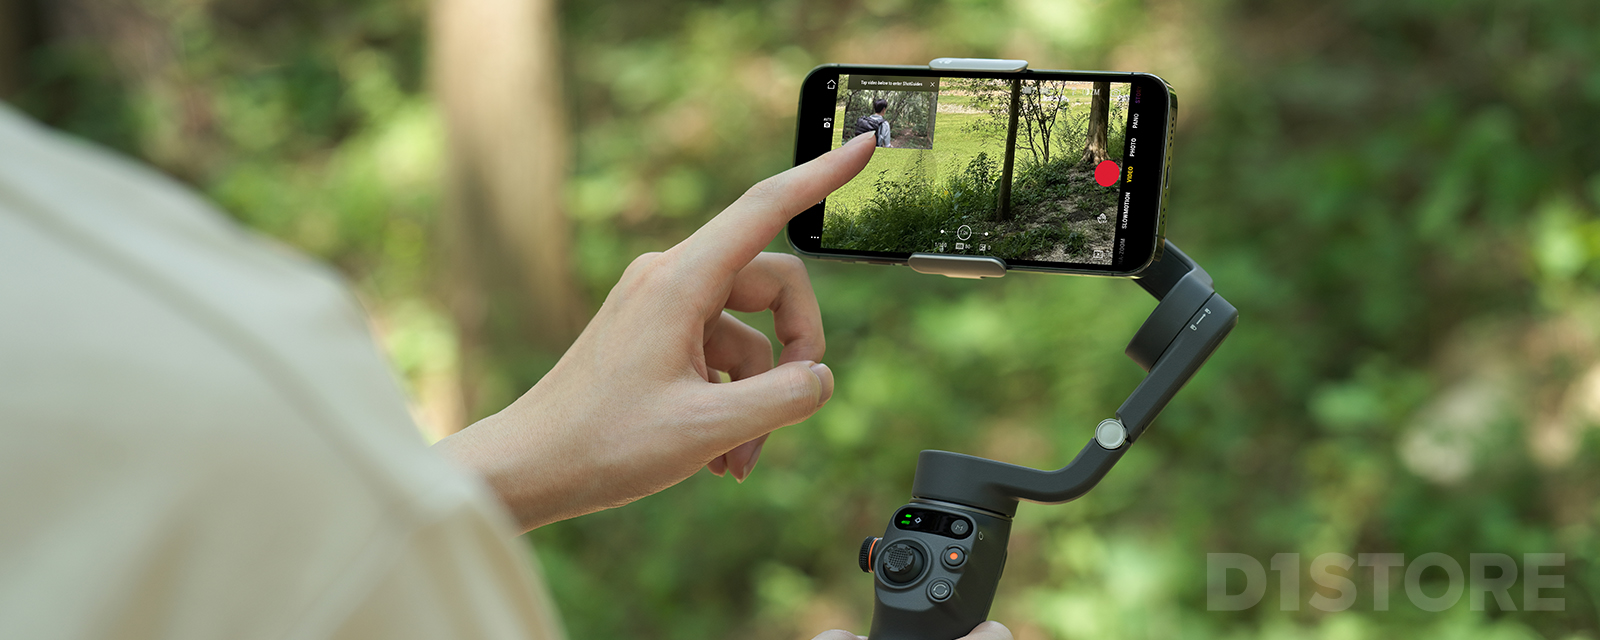 DJI Osmo Mobile 6 - Tell Your Story | Best Price Guarantee Only at D1 Store Australia